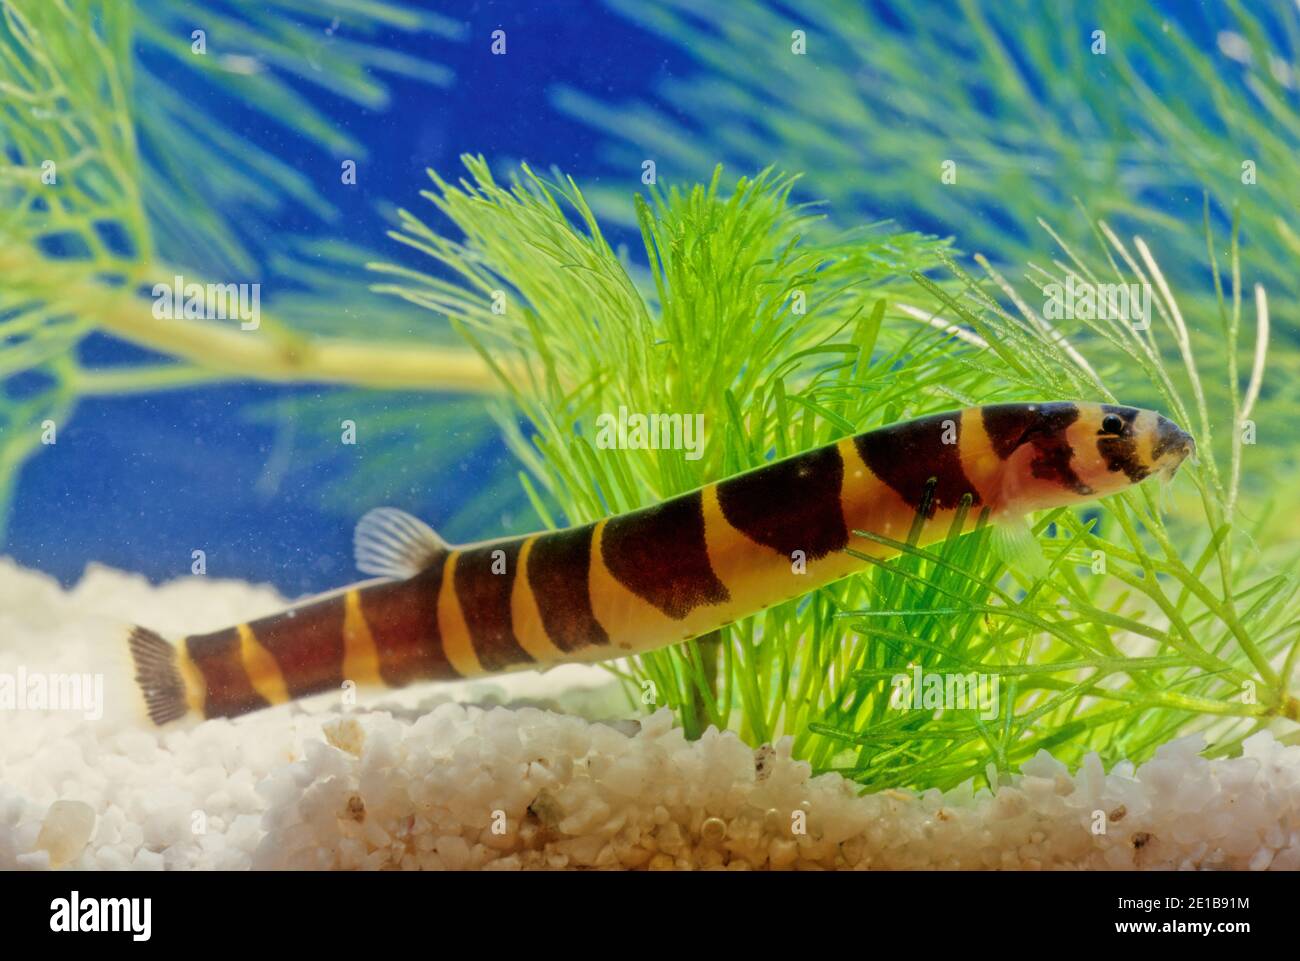 Pangio myersi (Myer's loach, Myer's kuhli or giant kuhl) is a species of loach in the genus Pangio native to Laos, Cambodia and Thailand. Stock Photo